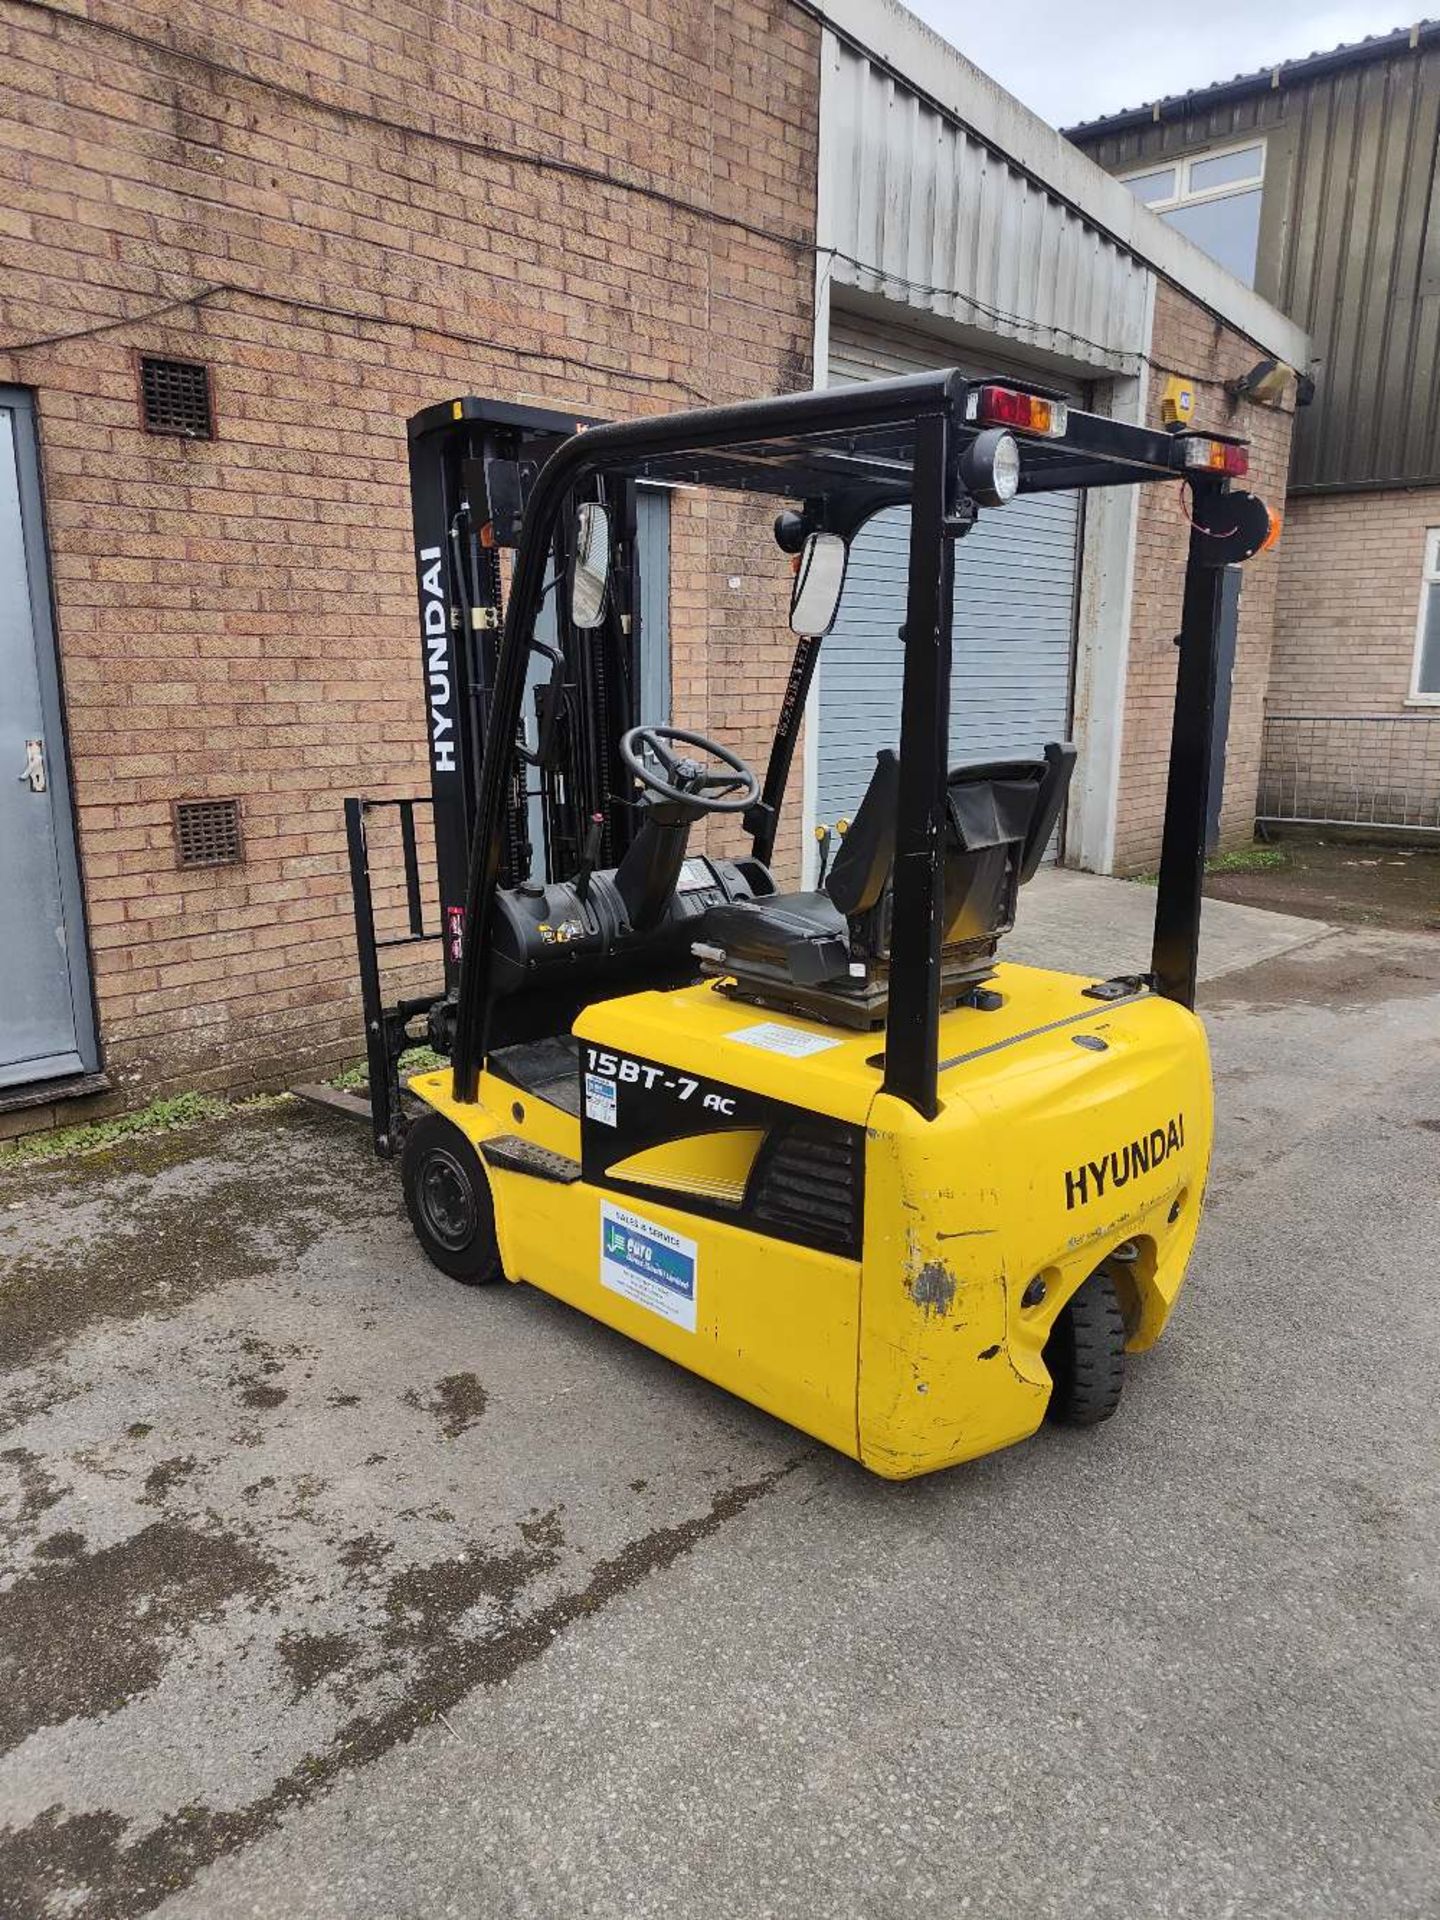 Hyundai 15BT-7 Electric Forklift - Image 8 of 12